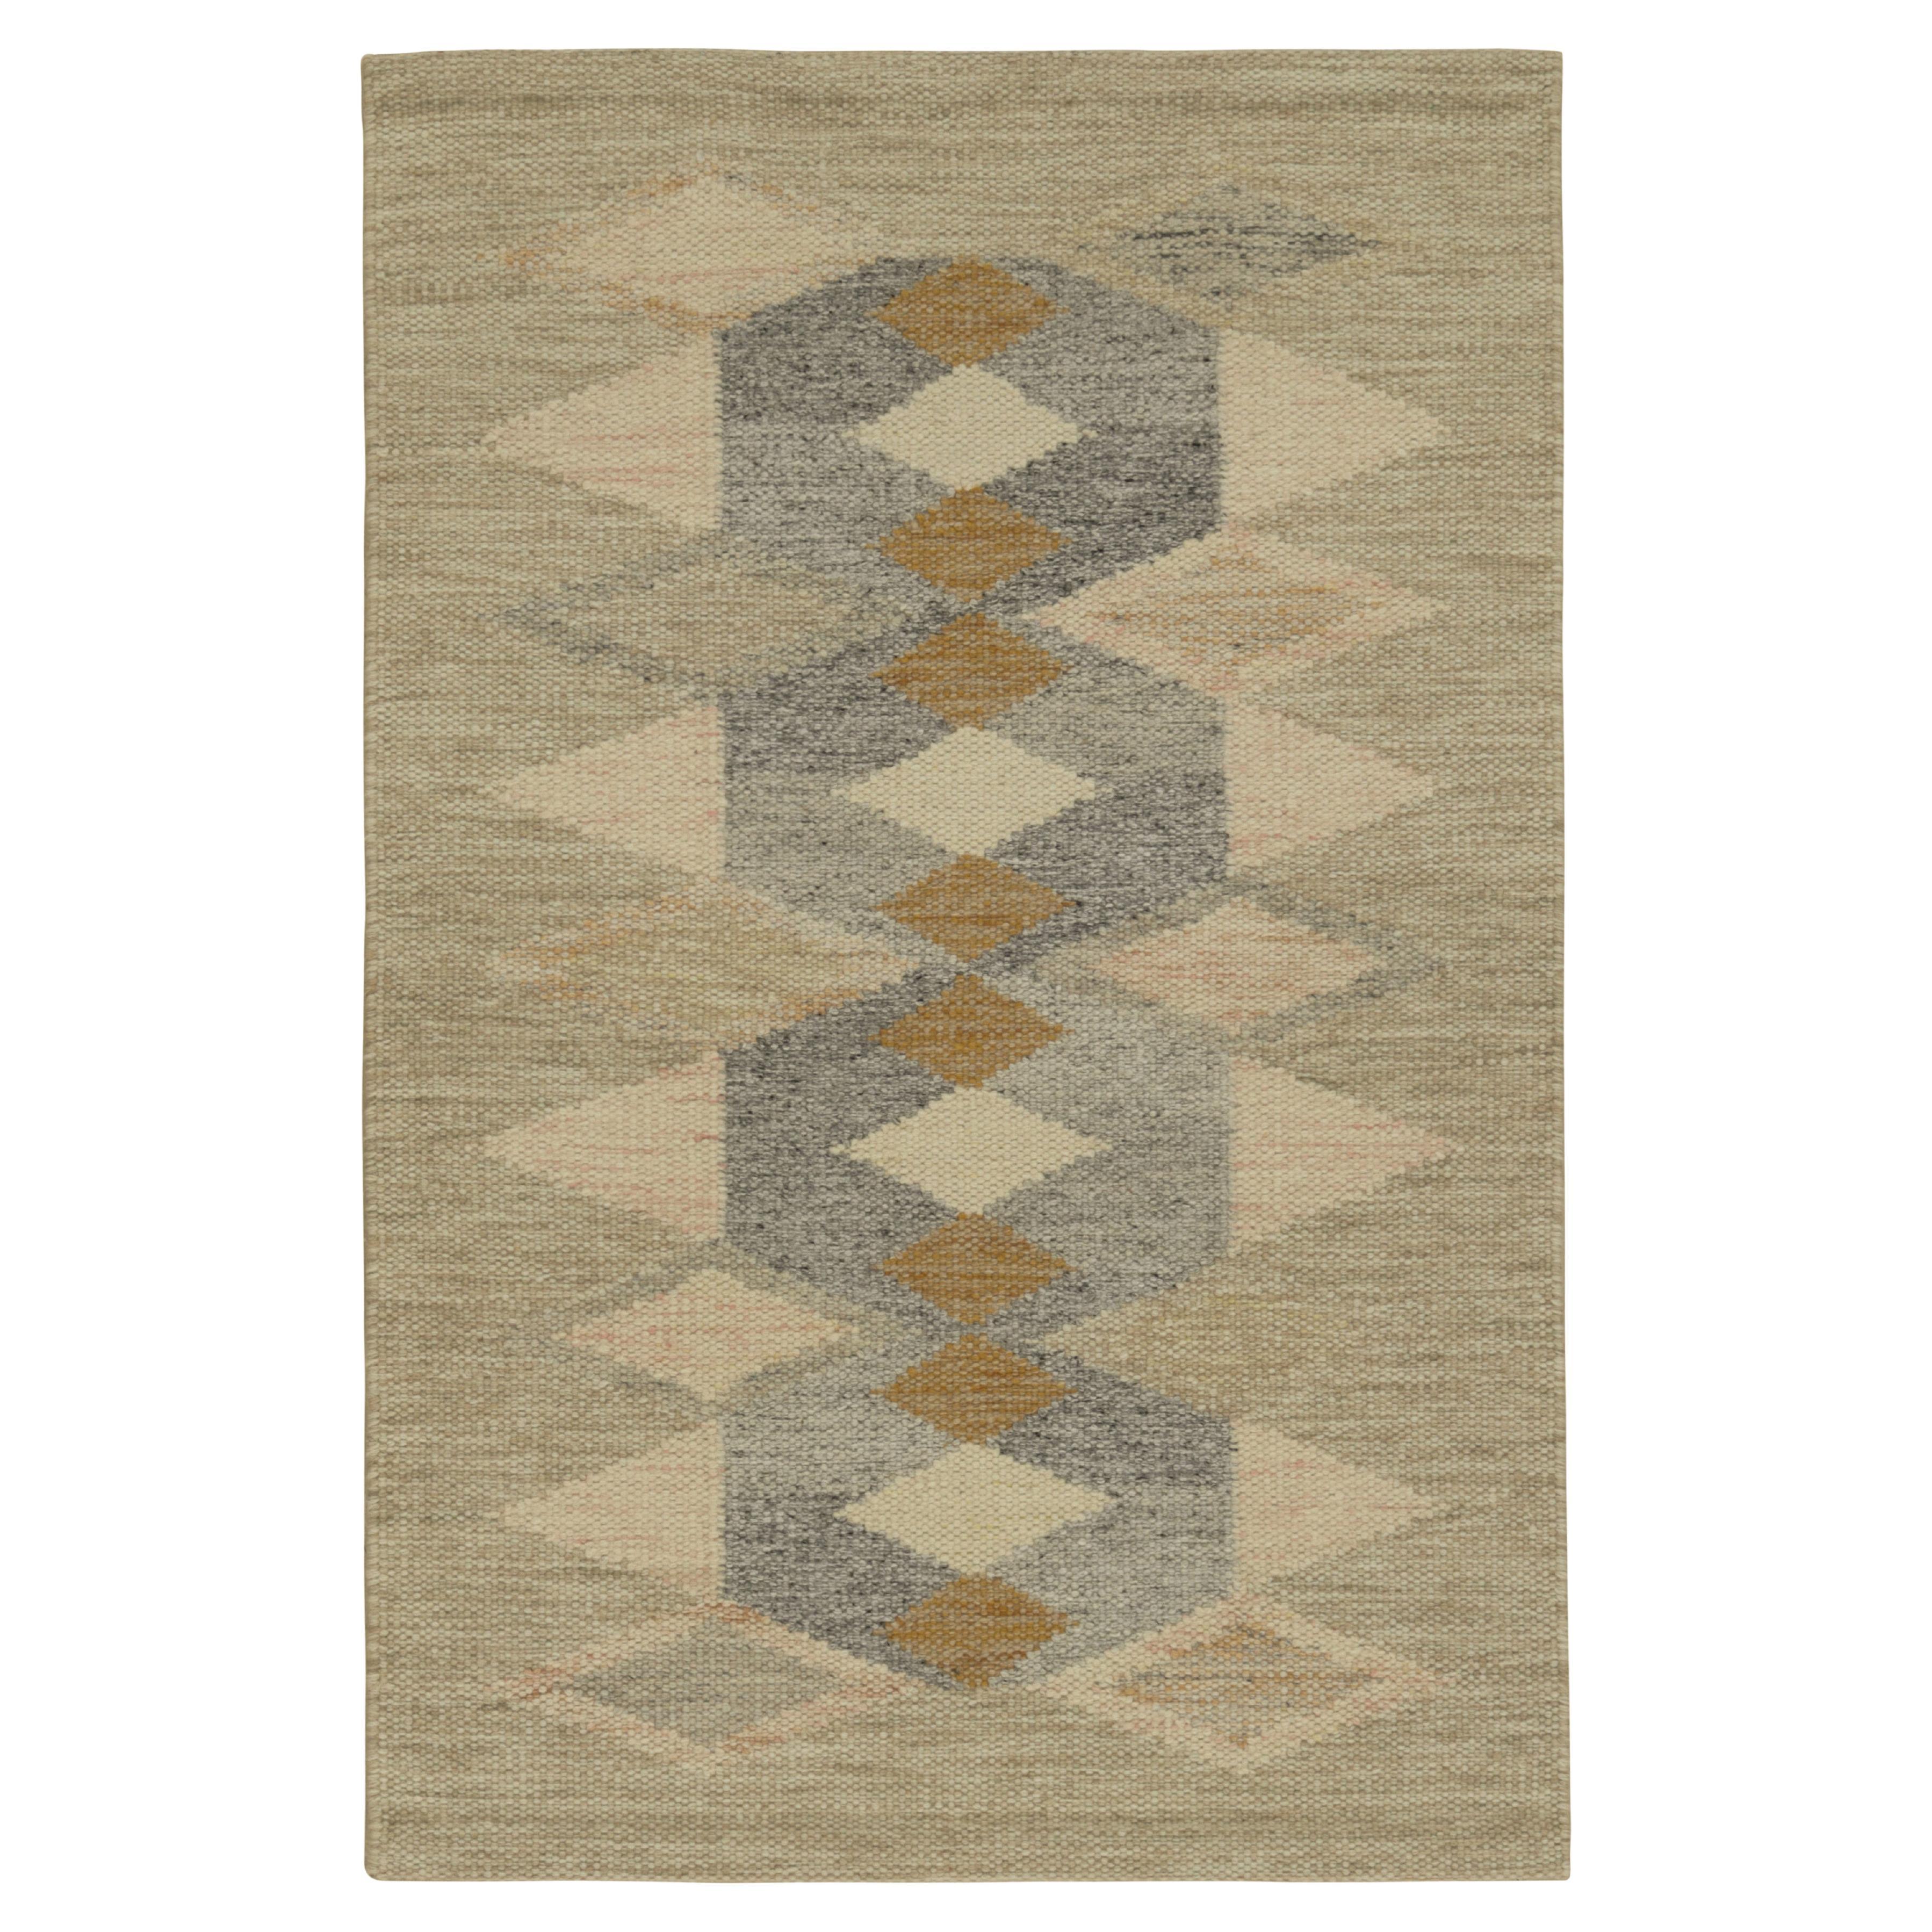 Rug & Kilim’s Scandinavian Style Rug in Beige and Gray, with Geometric Patterns For Sale